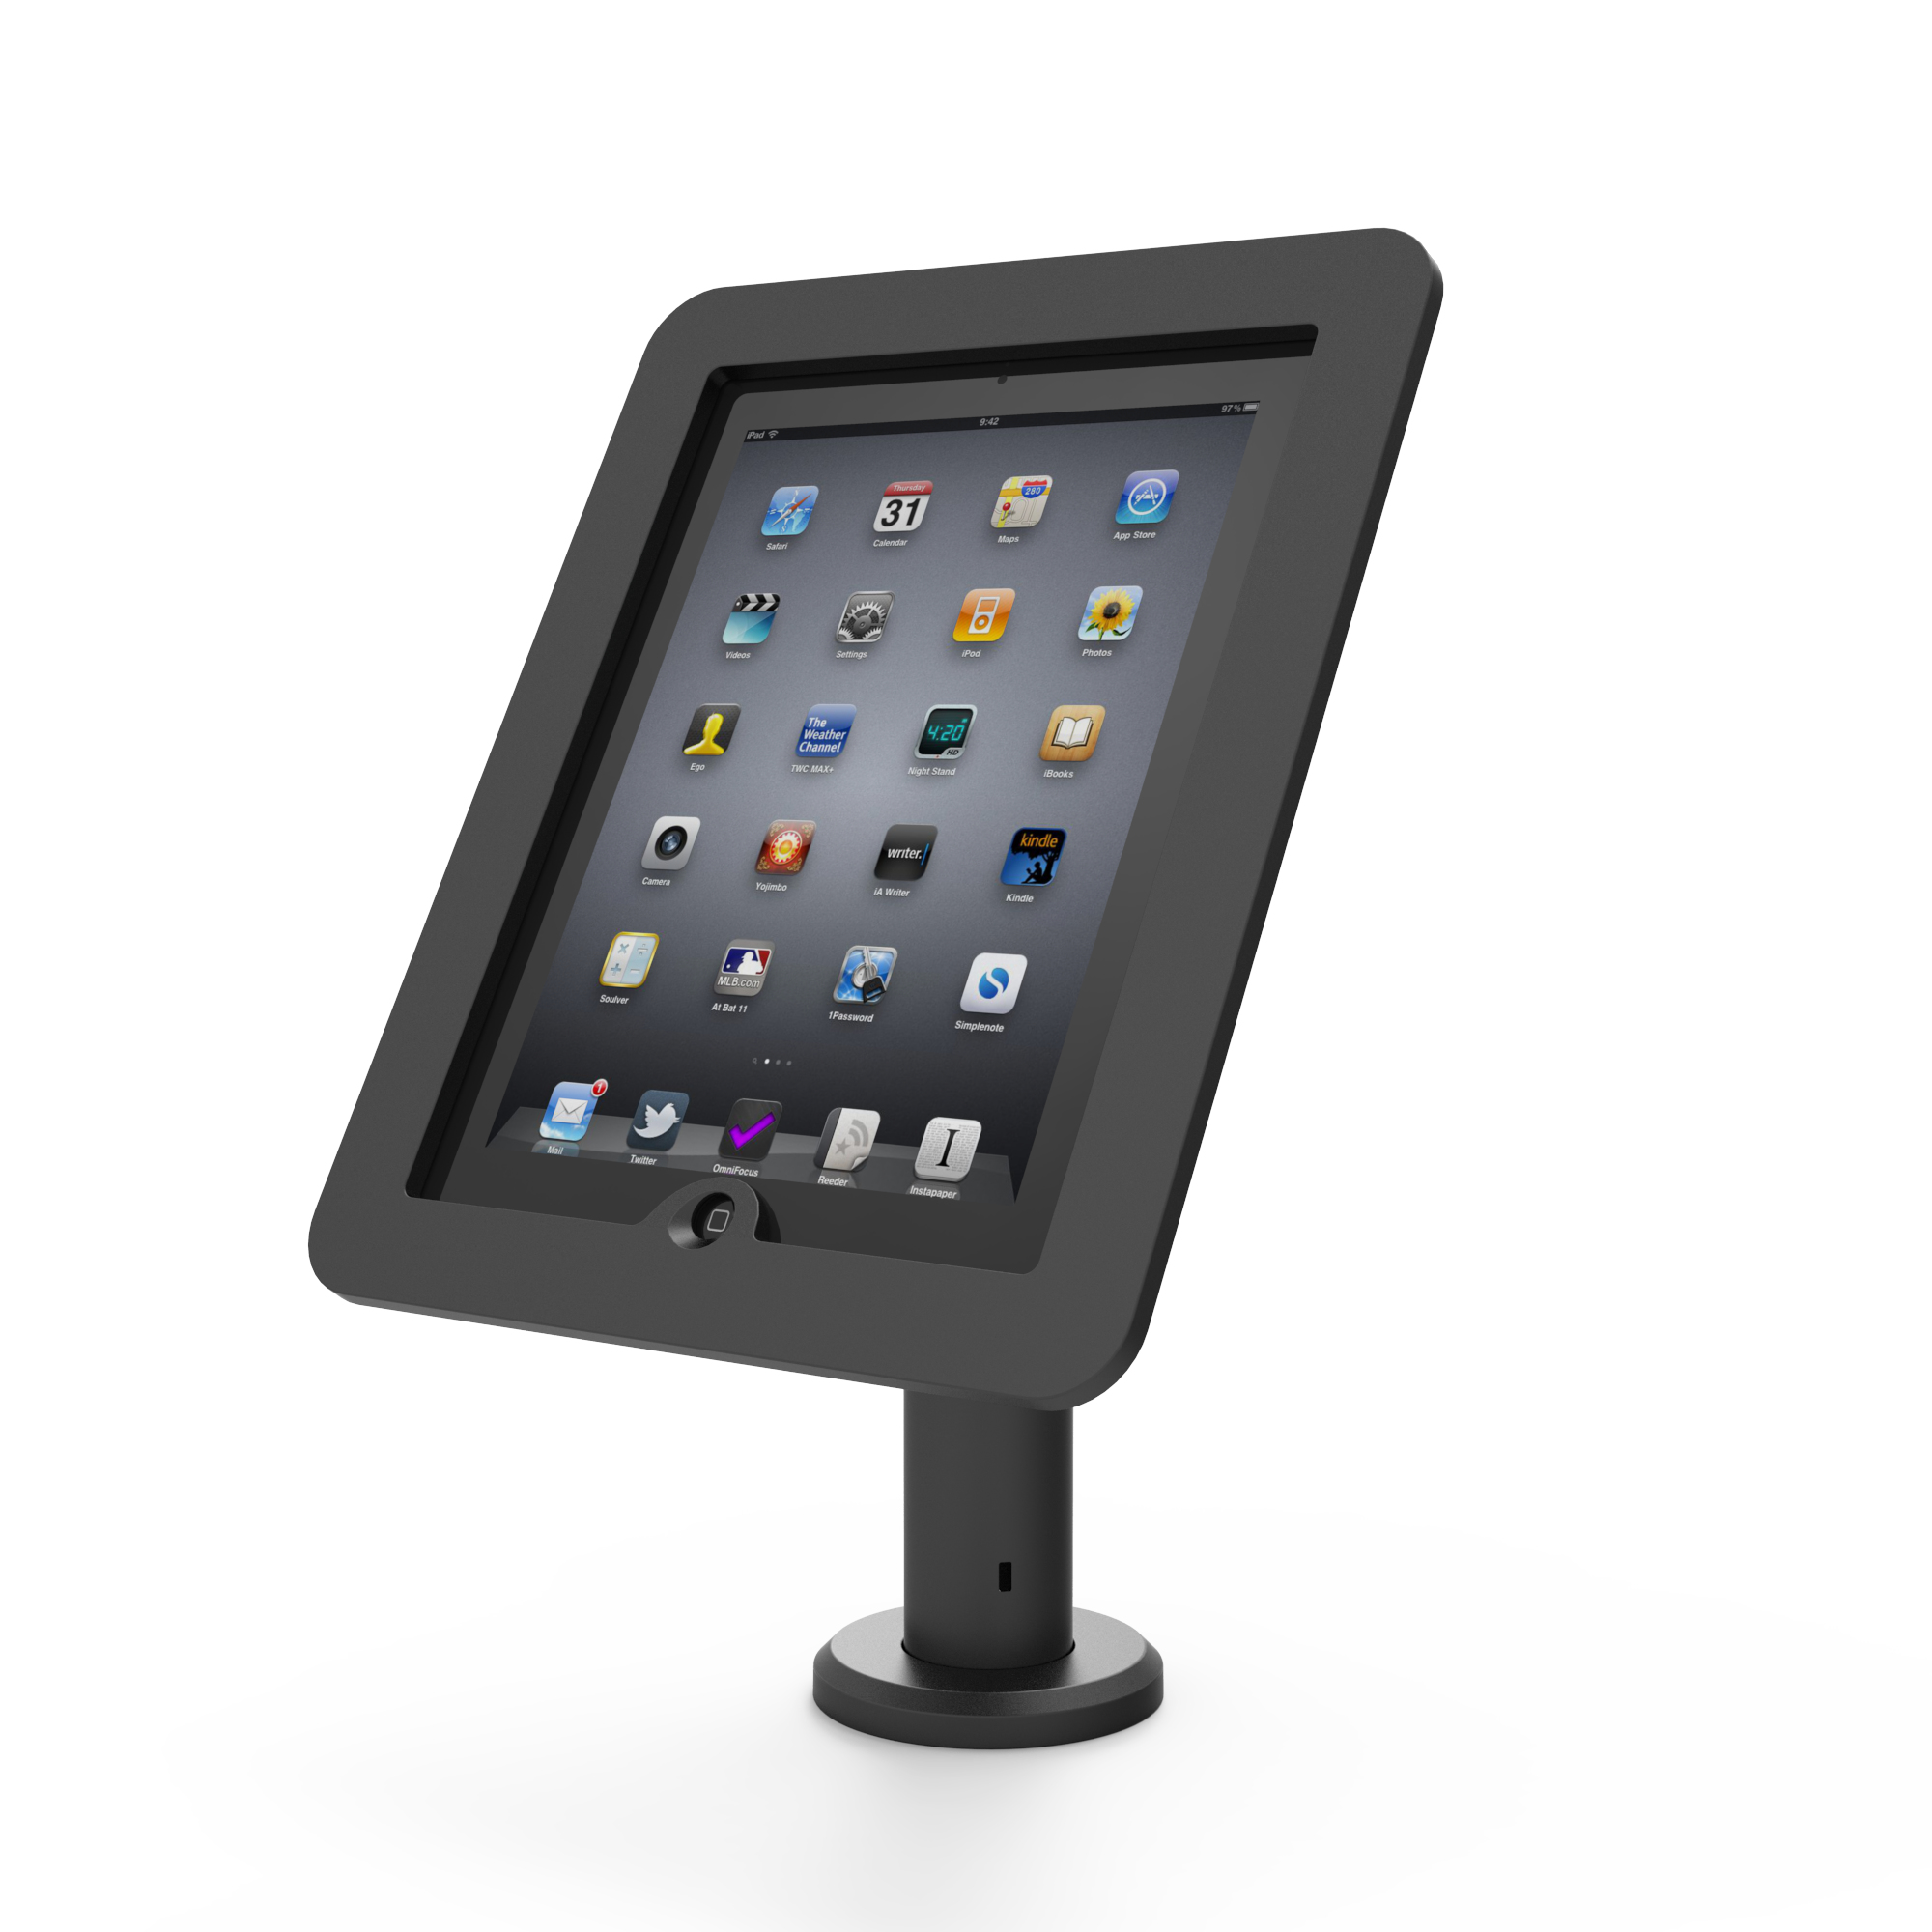 Compulocks Rise VESA Monitor Security Lock Counter Top Kiosk Stand 8" For Tablets And Other Devices